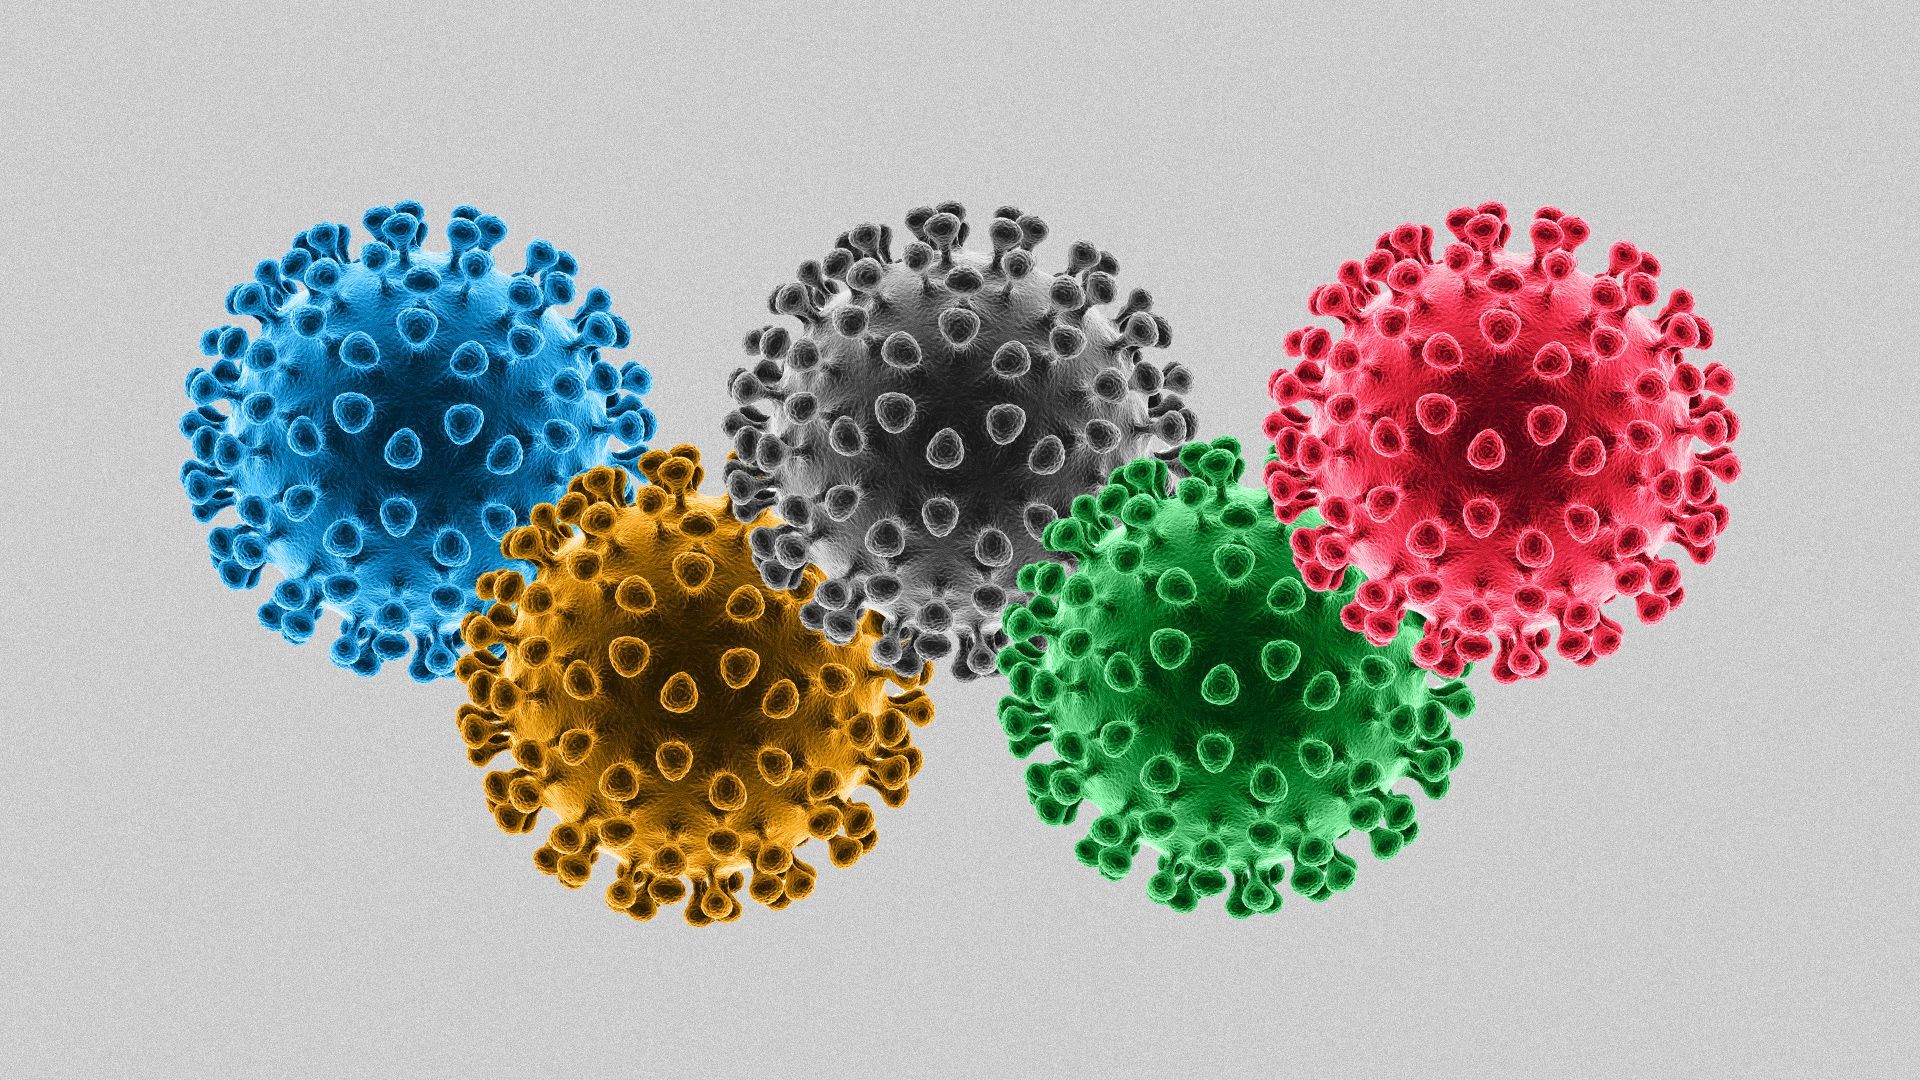 Illustration of virus cells in the shape of Olympic rings